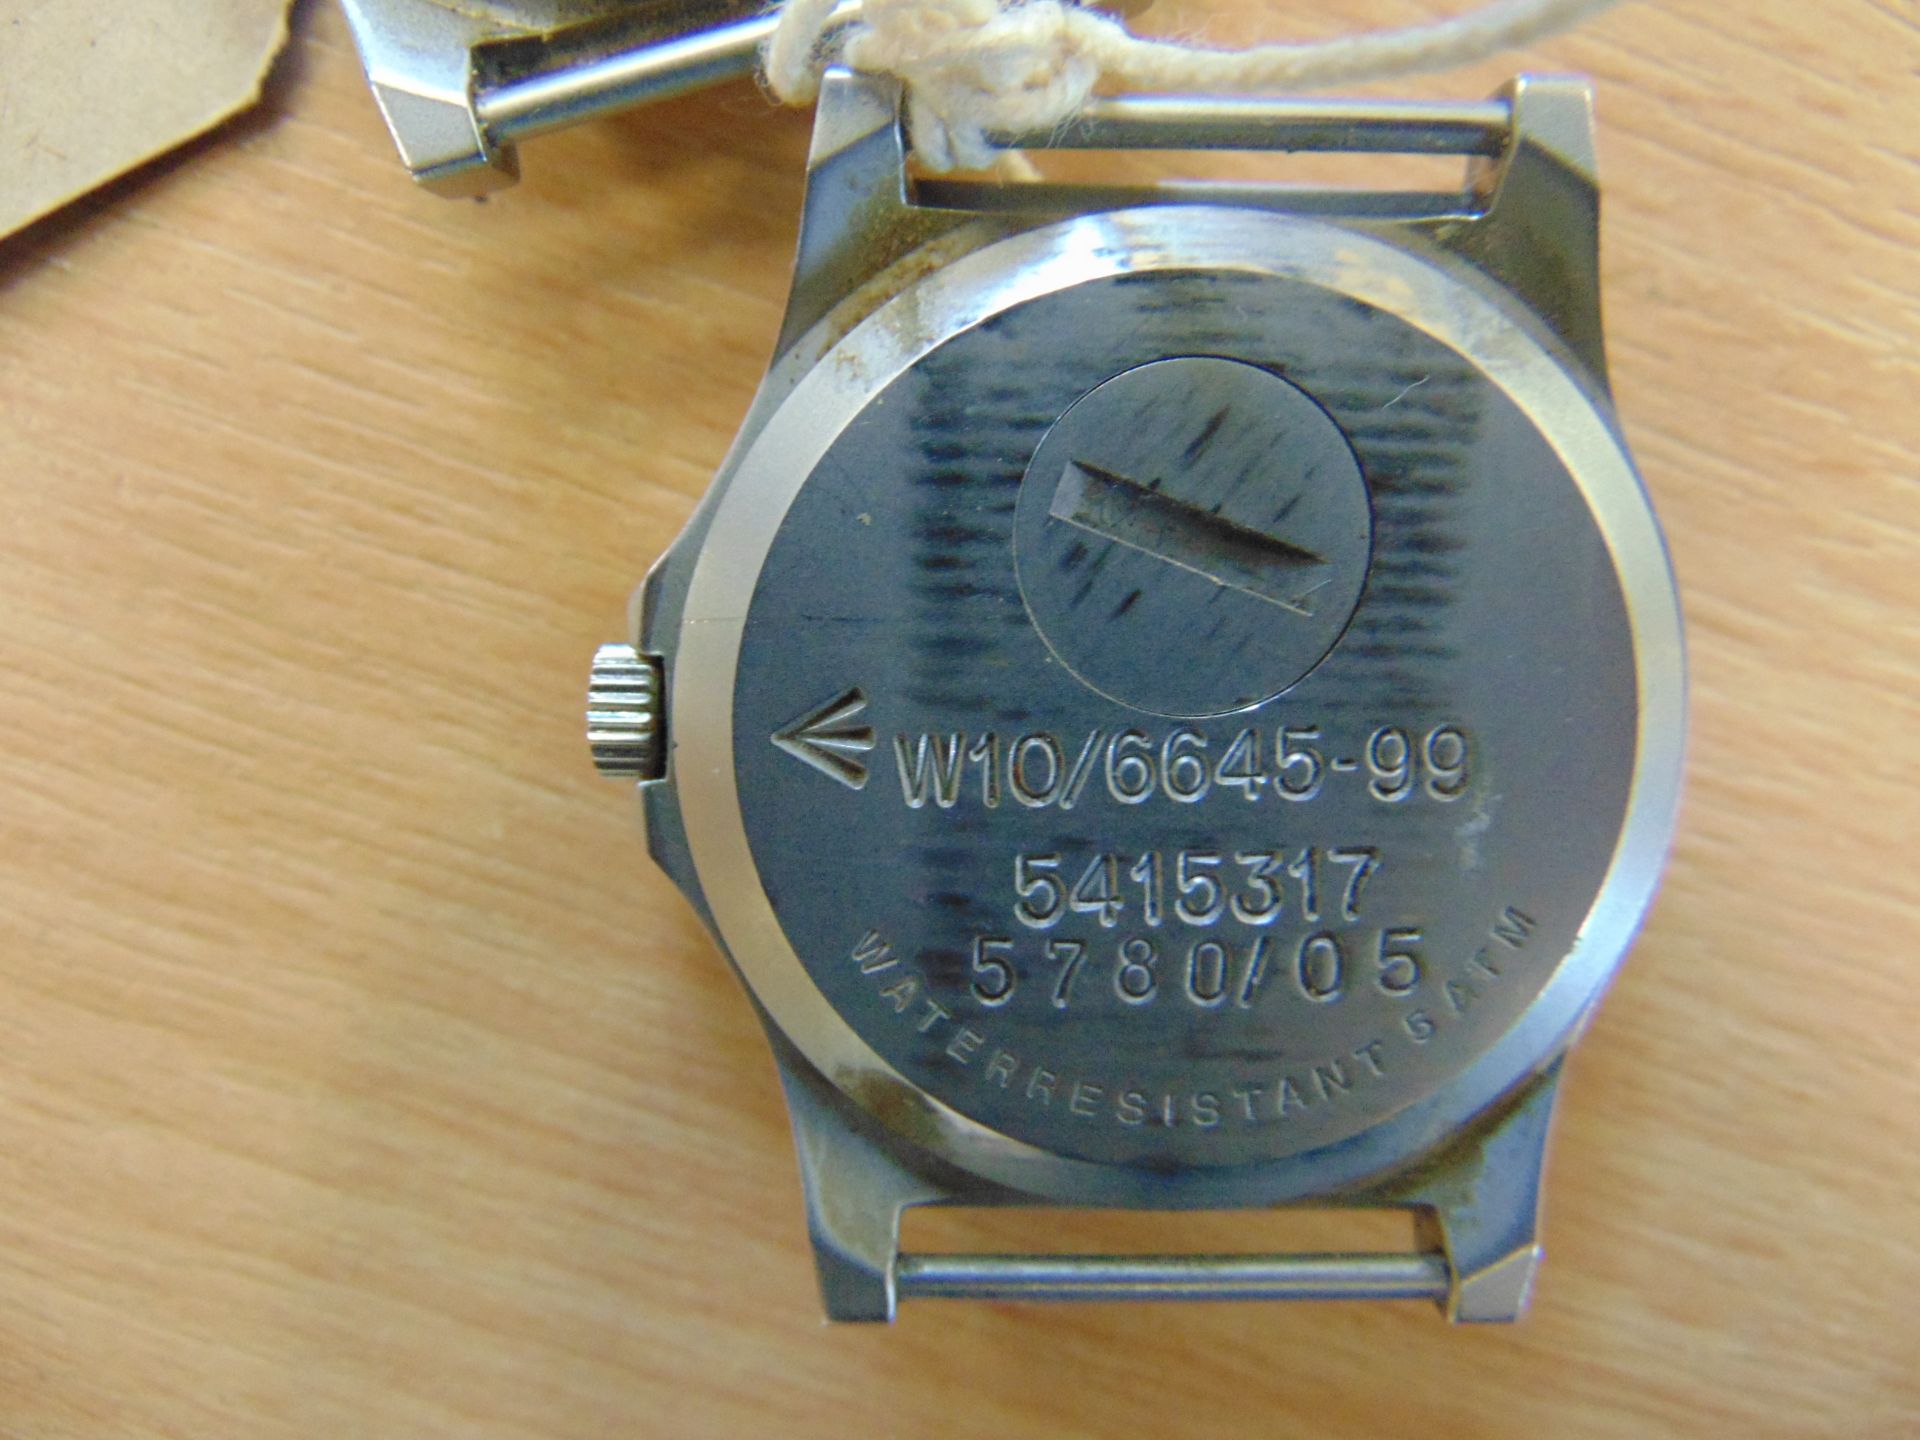 2x CWC W10 WATCHES DATED 2005 & 2006 WATER RESISTANT TO 5 ATM - Image 6 of 6